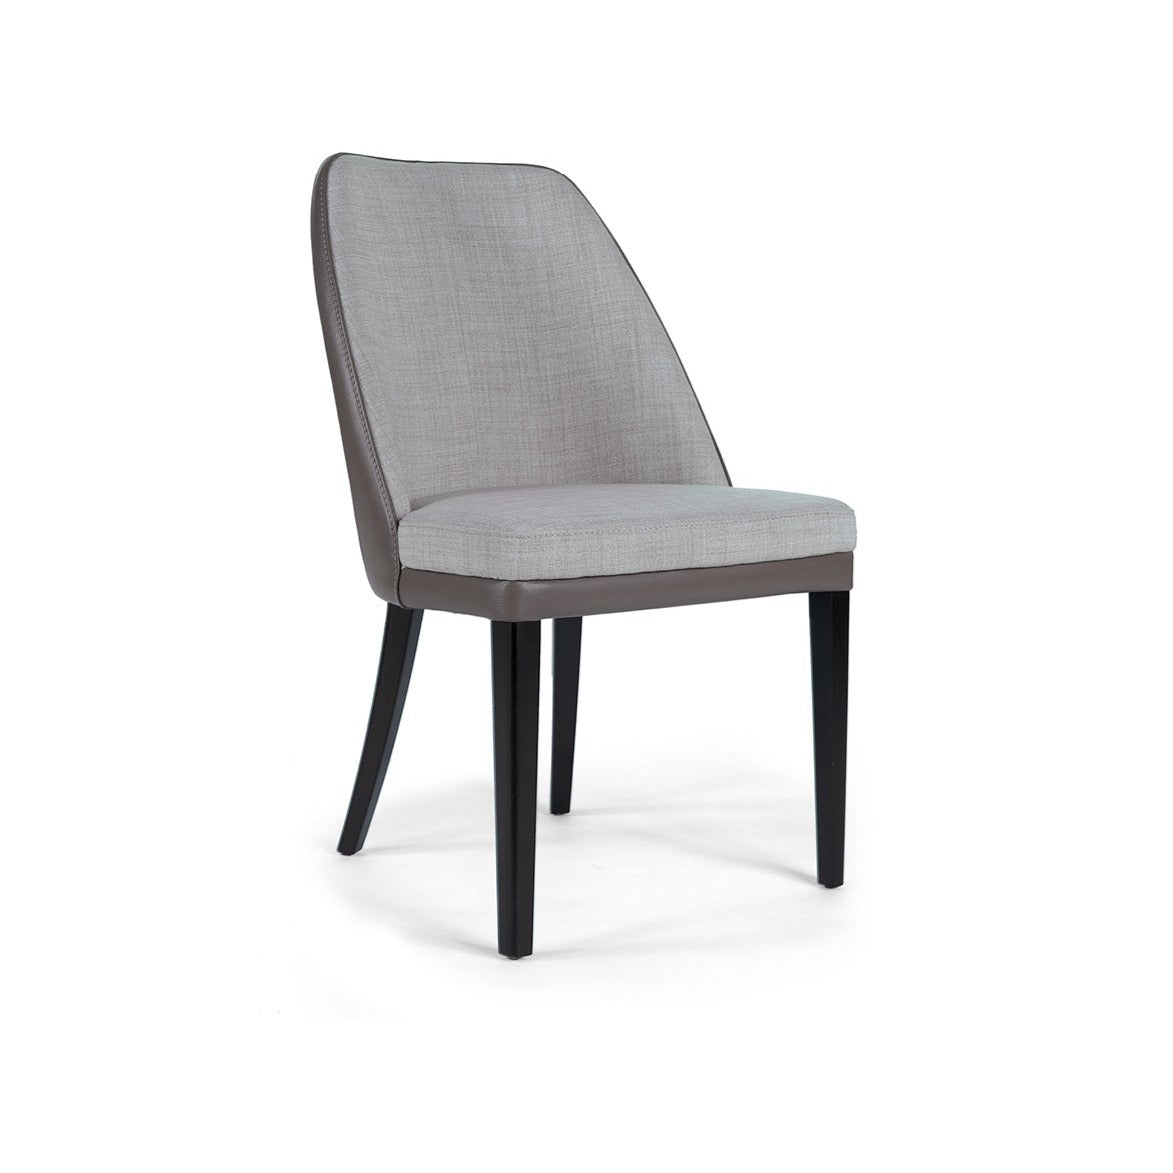 JULIE I Dining Chair by Borzalino